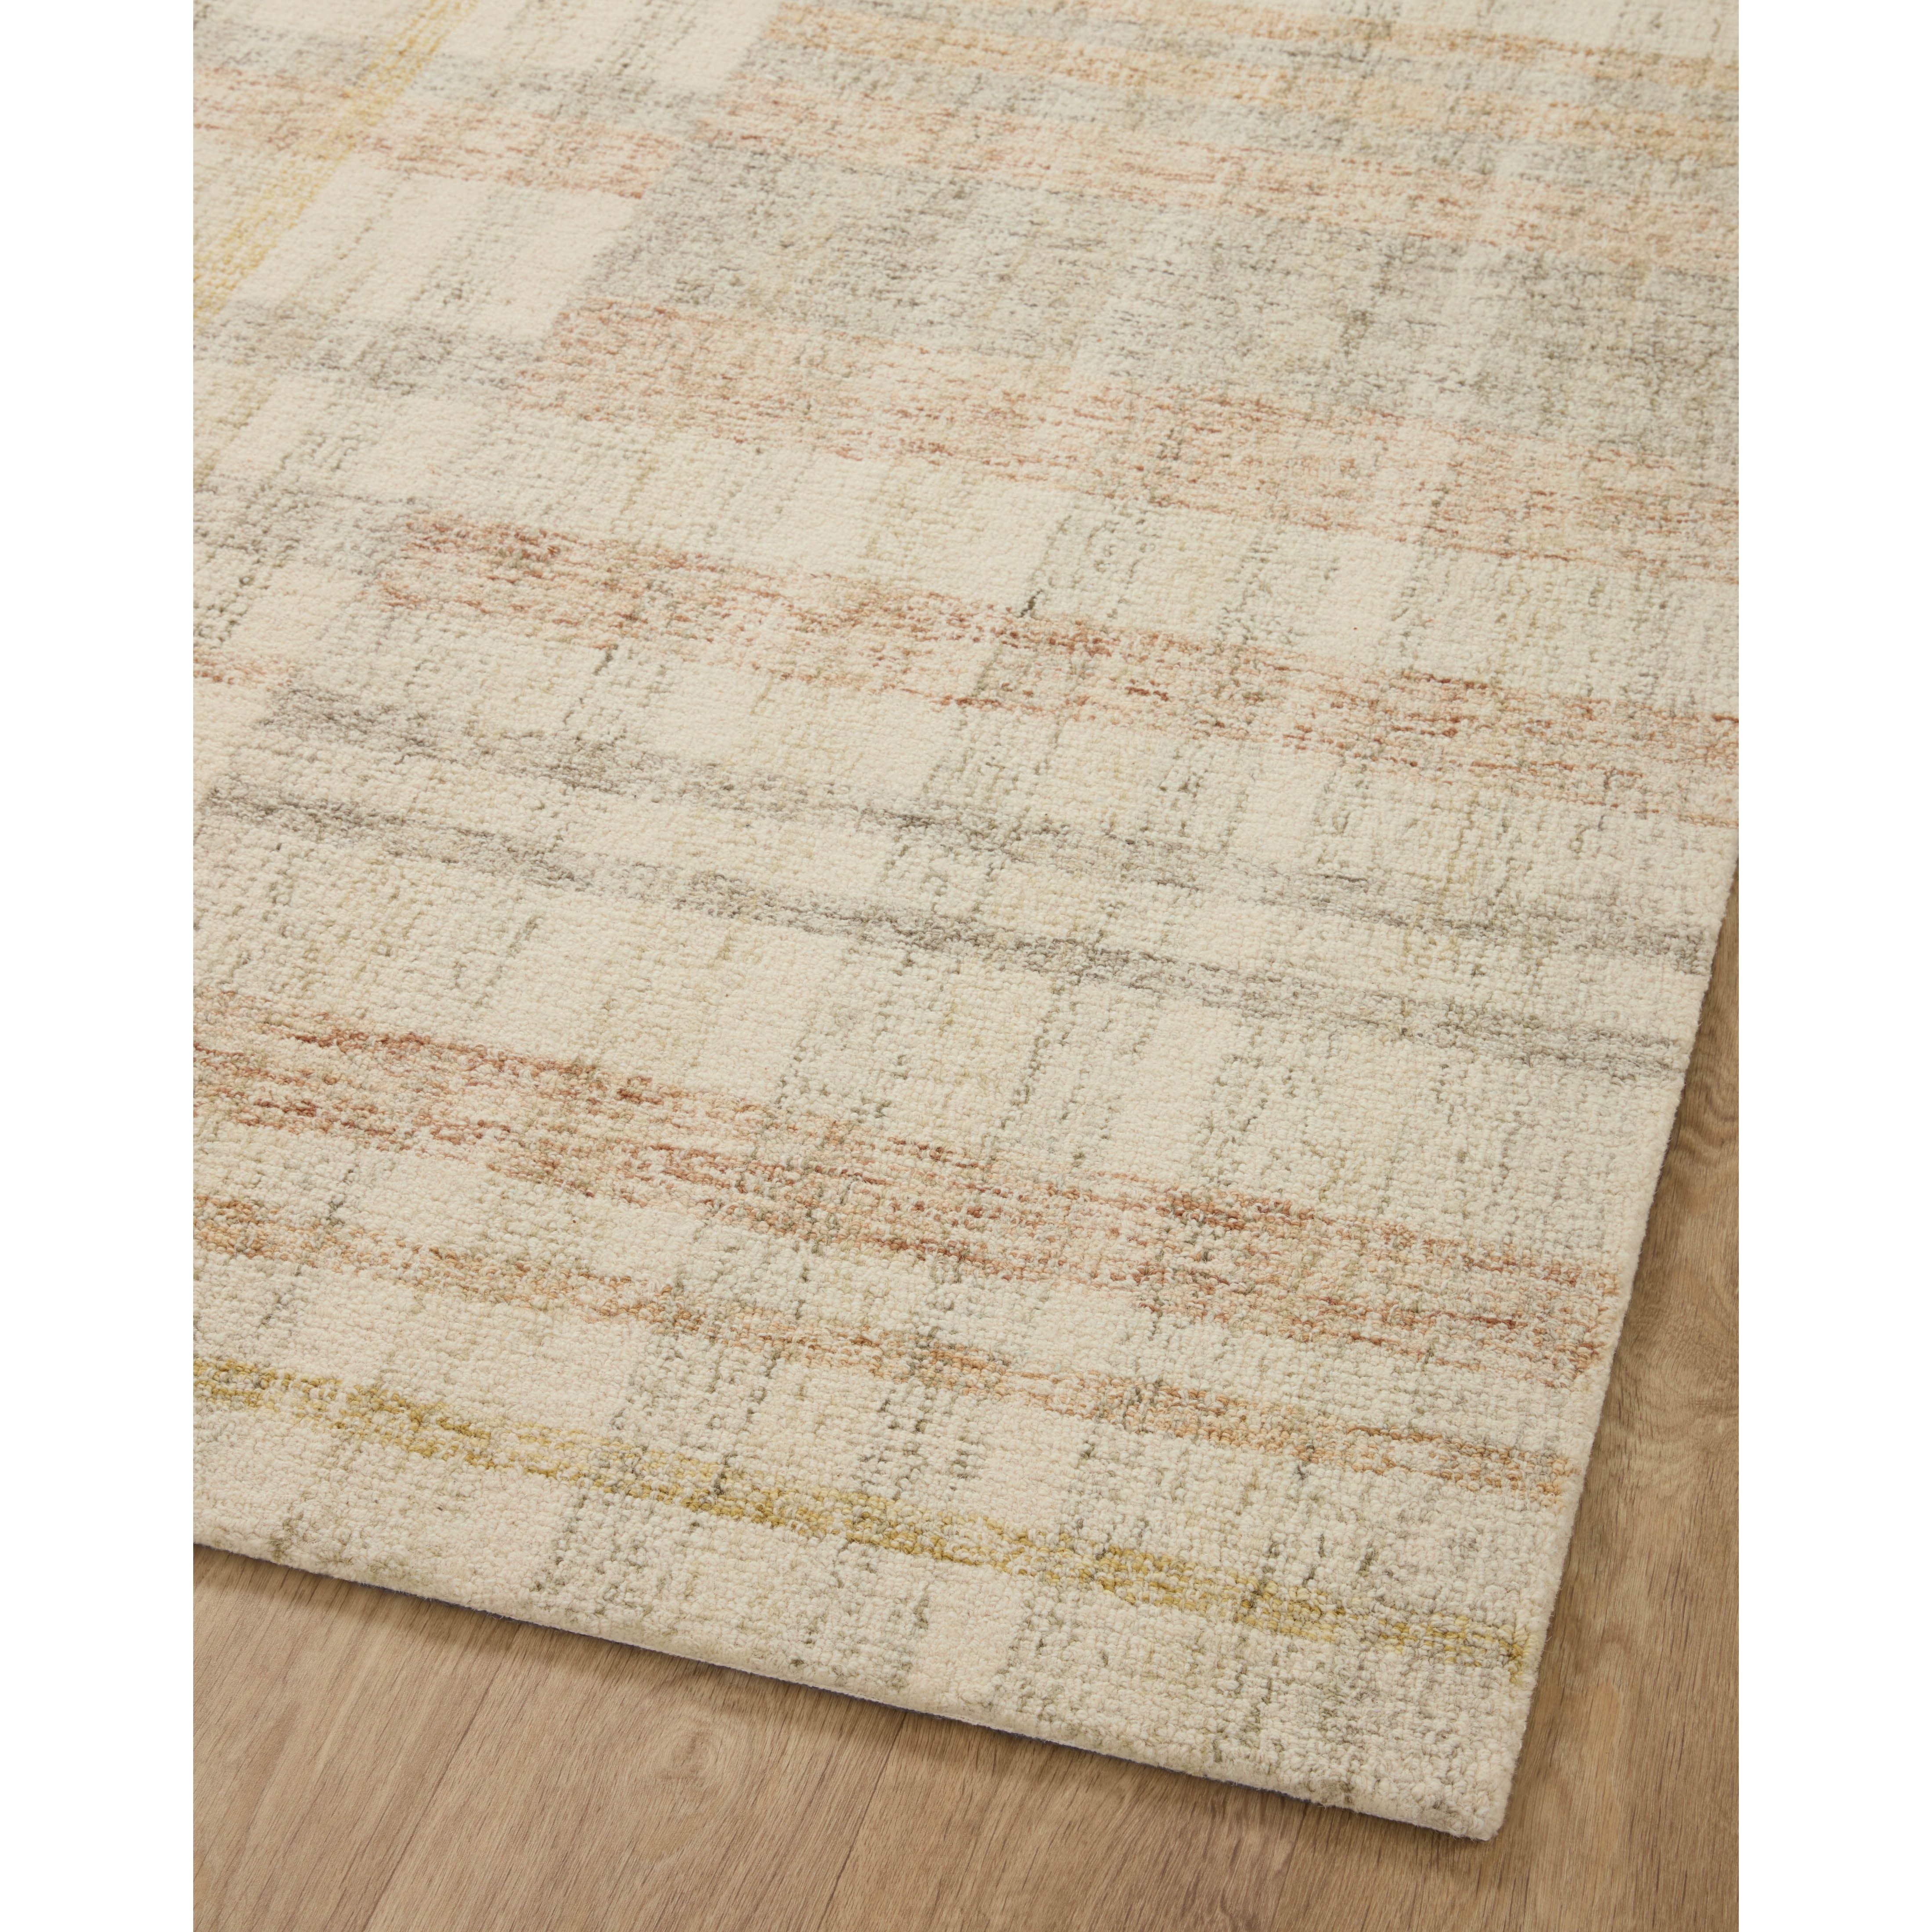 This rug nails the balance of a light + bright rug with a warm aesthetic. Reminiscent of our favorite casual, vintage striped hemp rugs, the Chris Natural / Multi rug will give a curated look to your space. Amethyst Home provides interior design services, furniture, rugs, and lighting in the Austin metro area.